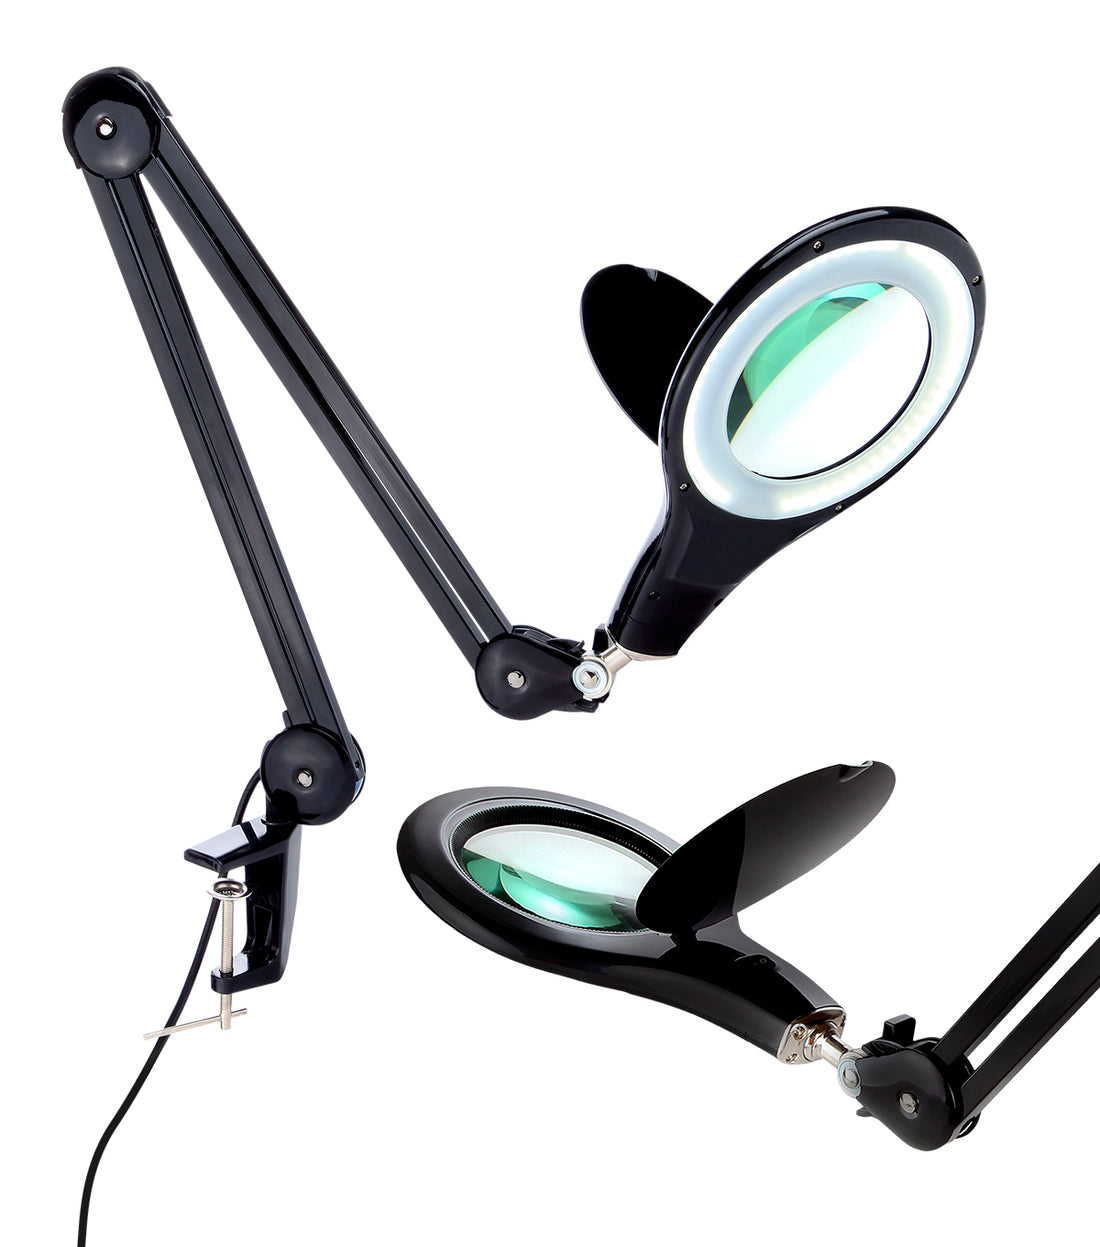 Magnifying Glass With Stand Handheld 2in1 Magnifiers LED Lighted Desk  Reading